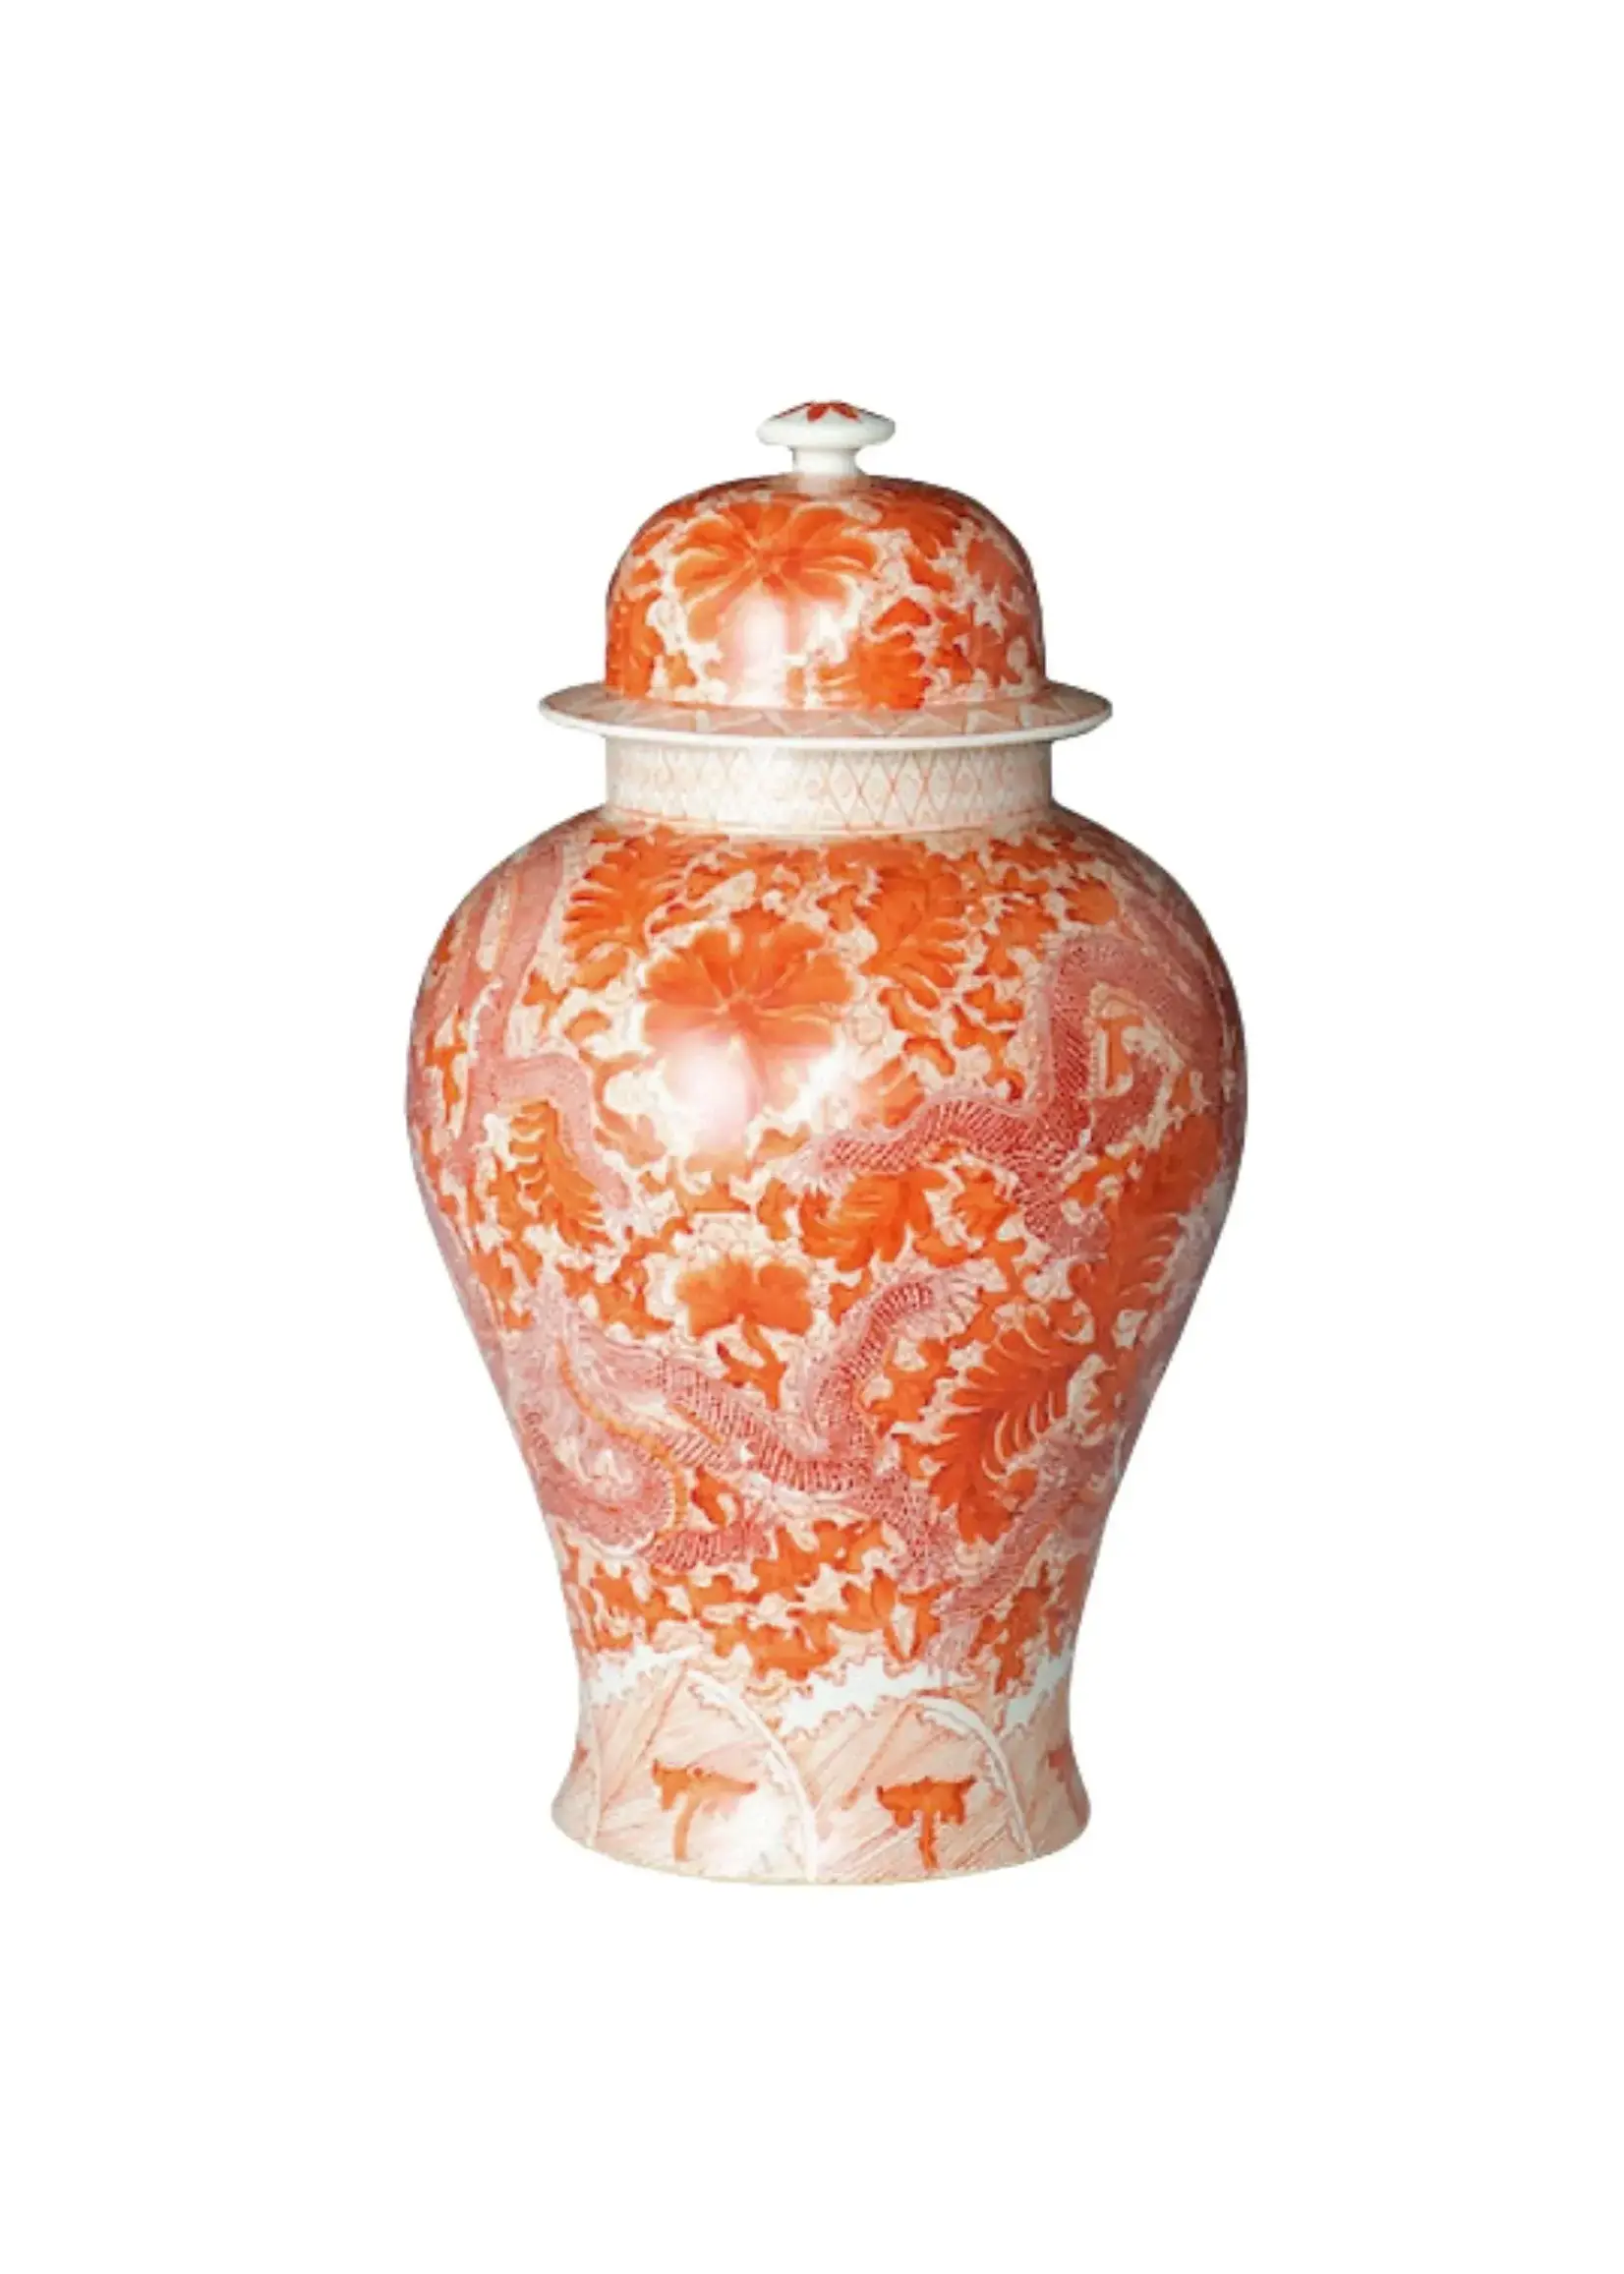 Legend of Asia Orange Temple Jar with Dragon and Floral Motif